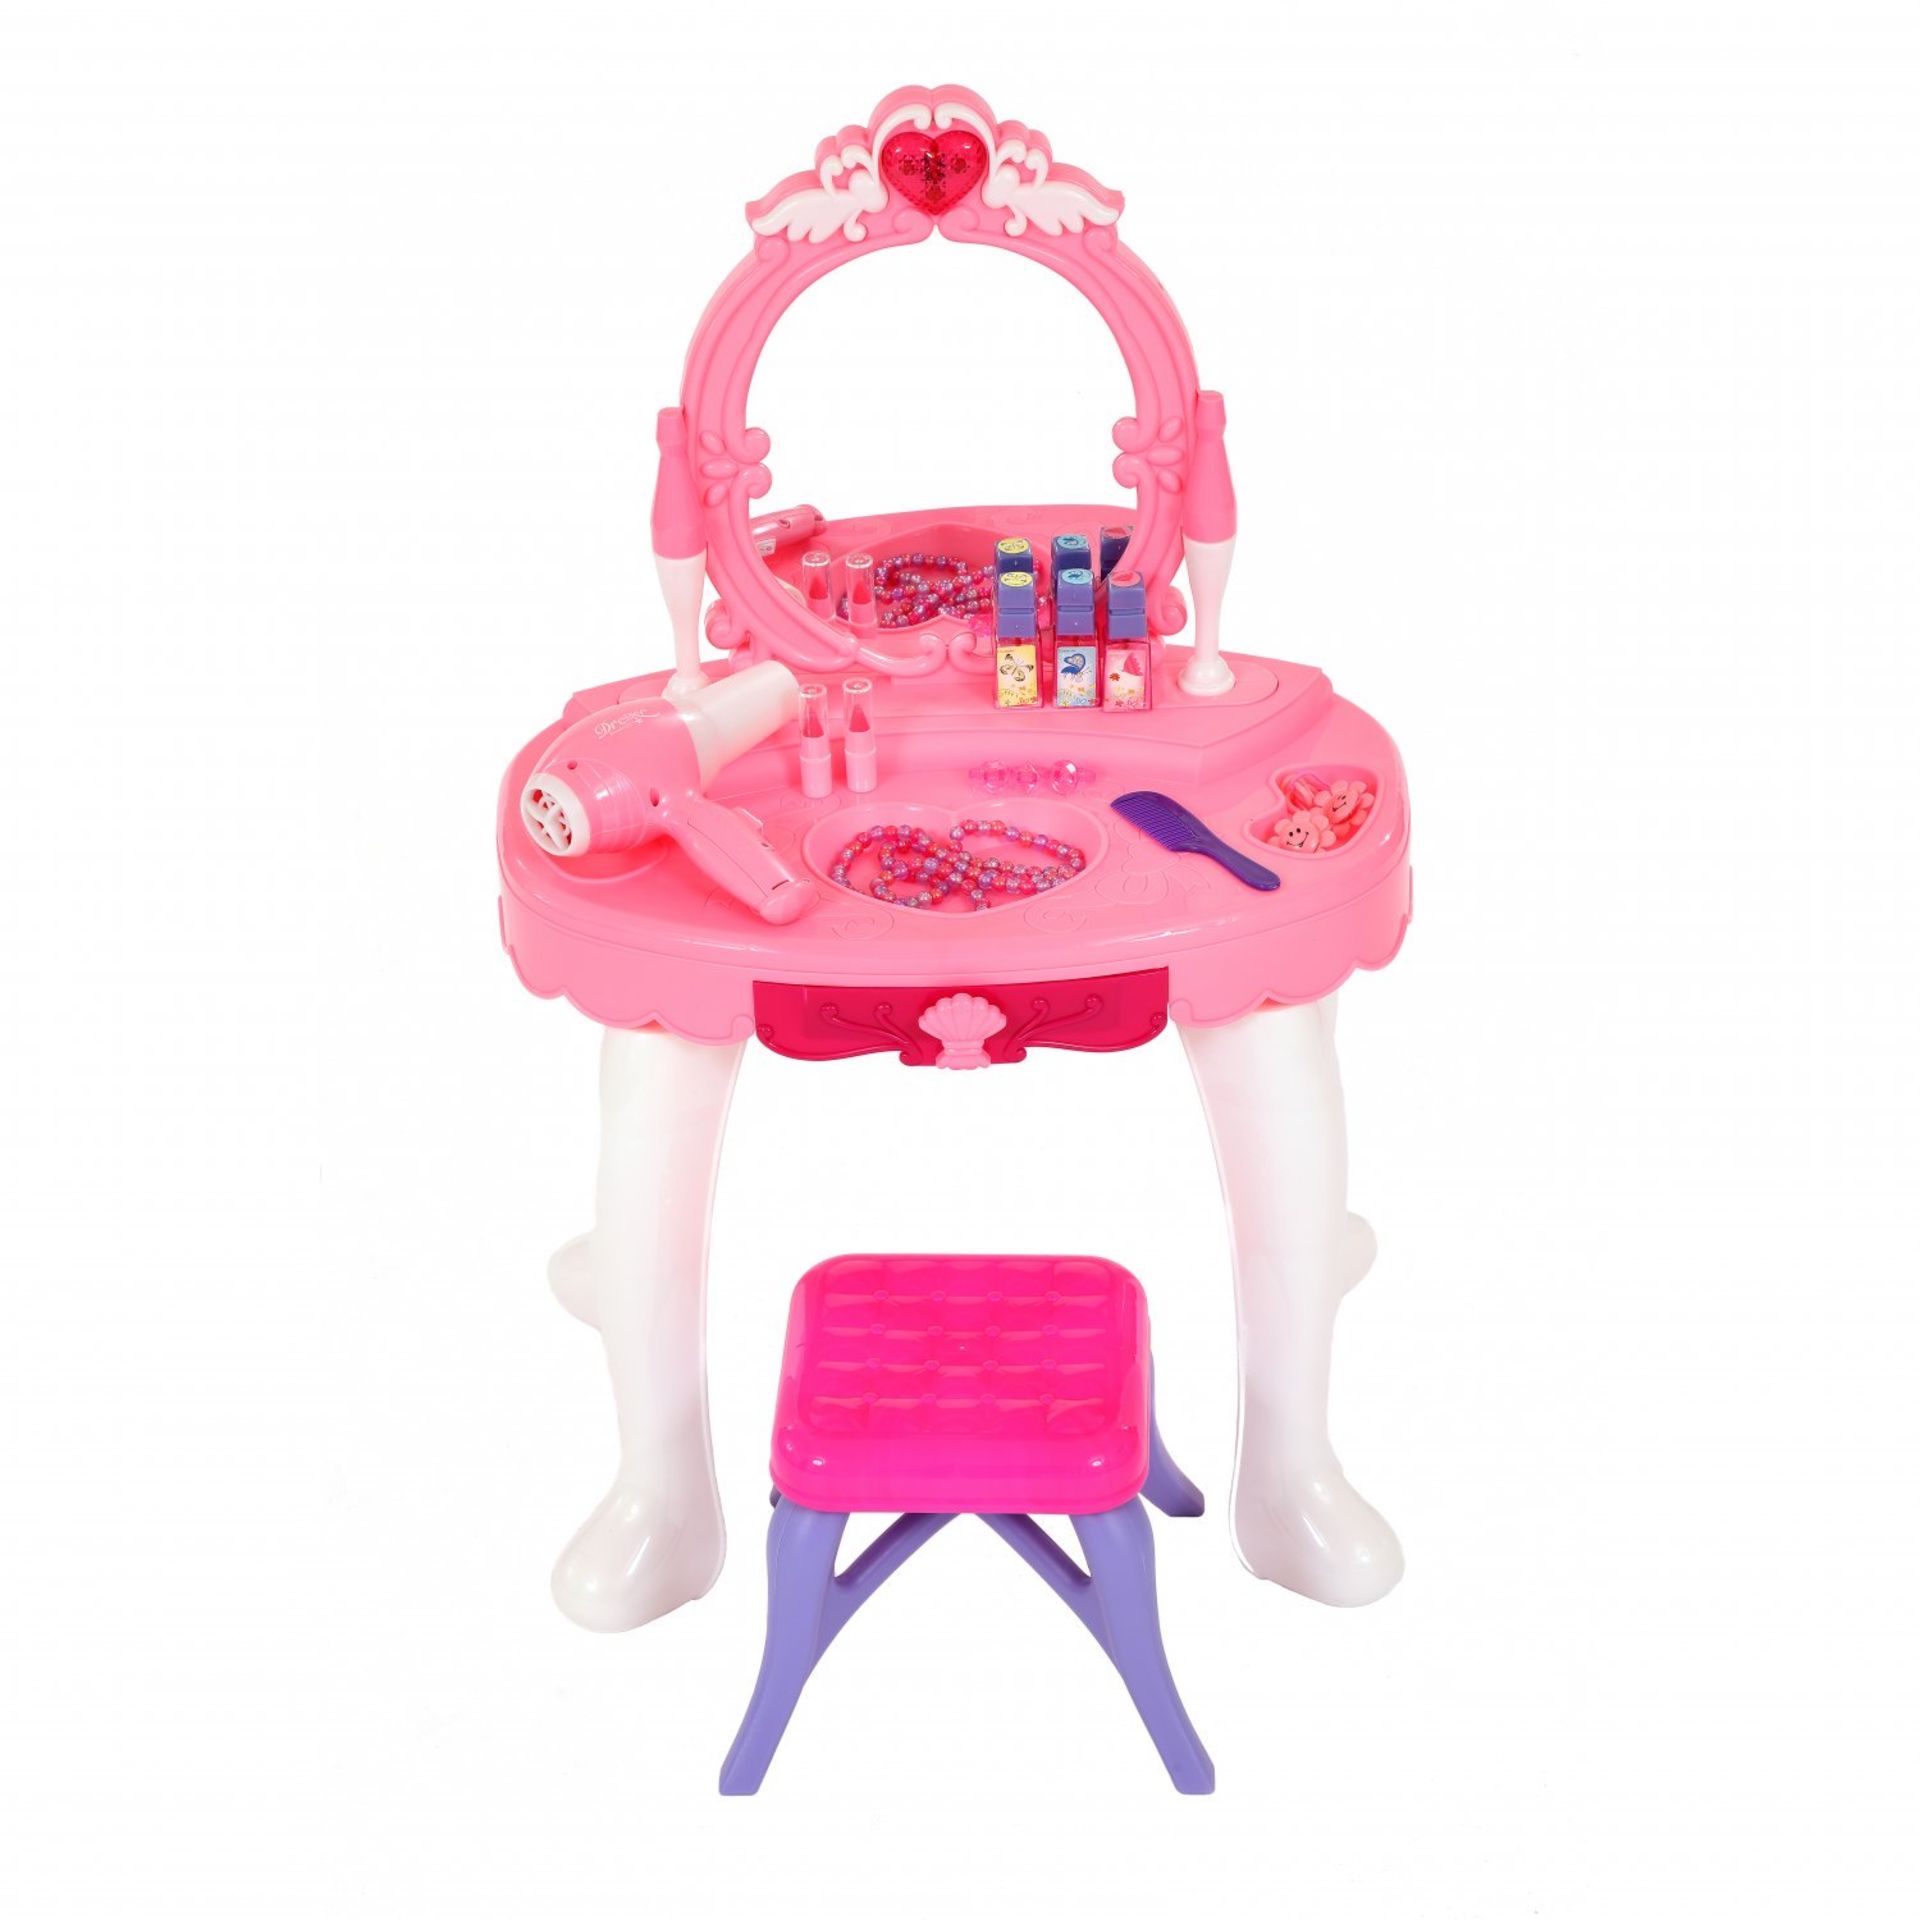 (RL86) Childrens Kids Girls Play Toy Dressing Table Glamour Mirror Little princesses wi... - Image 2 of 2